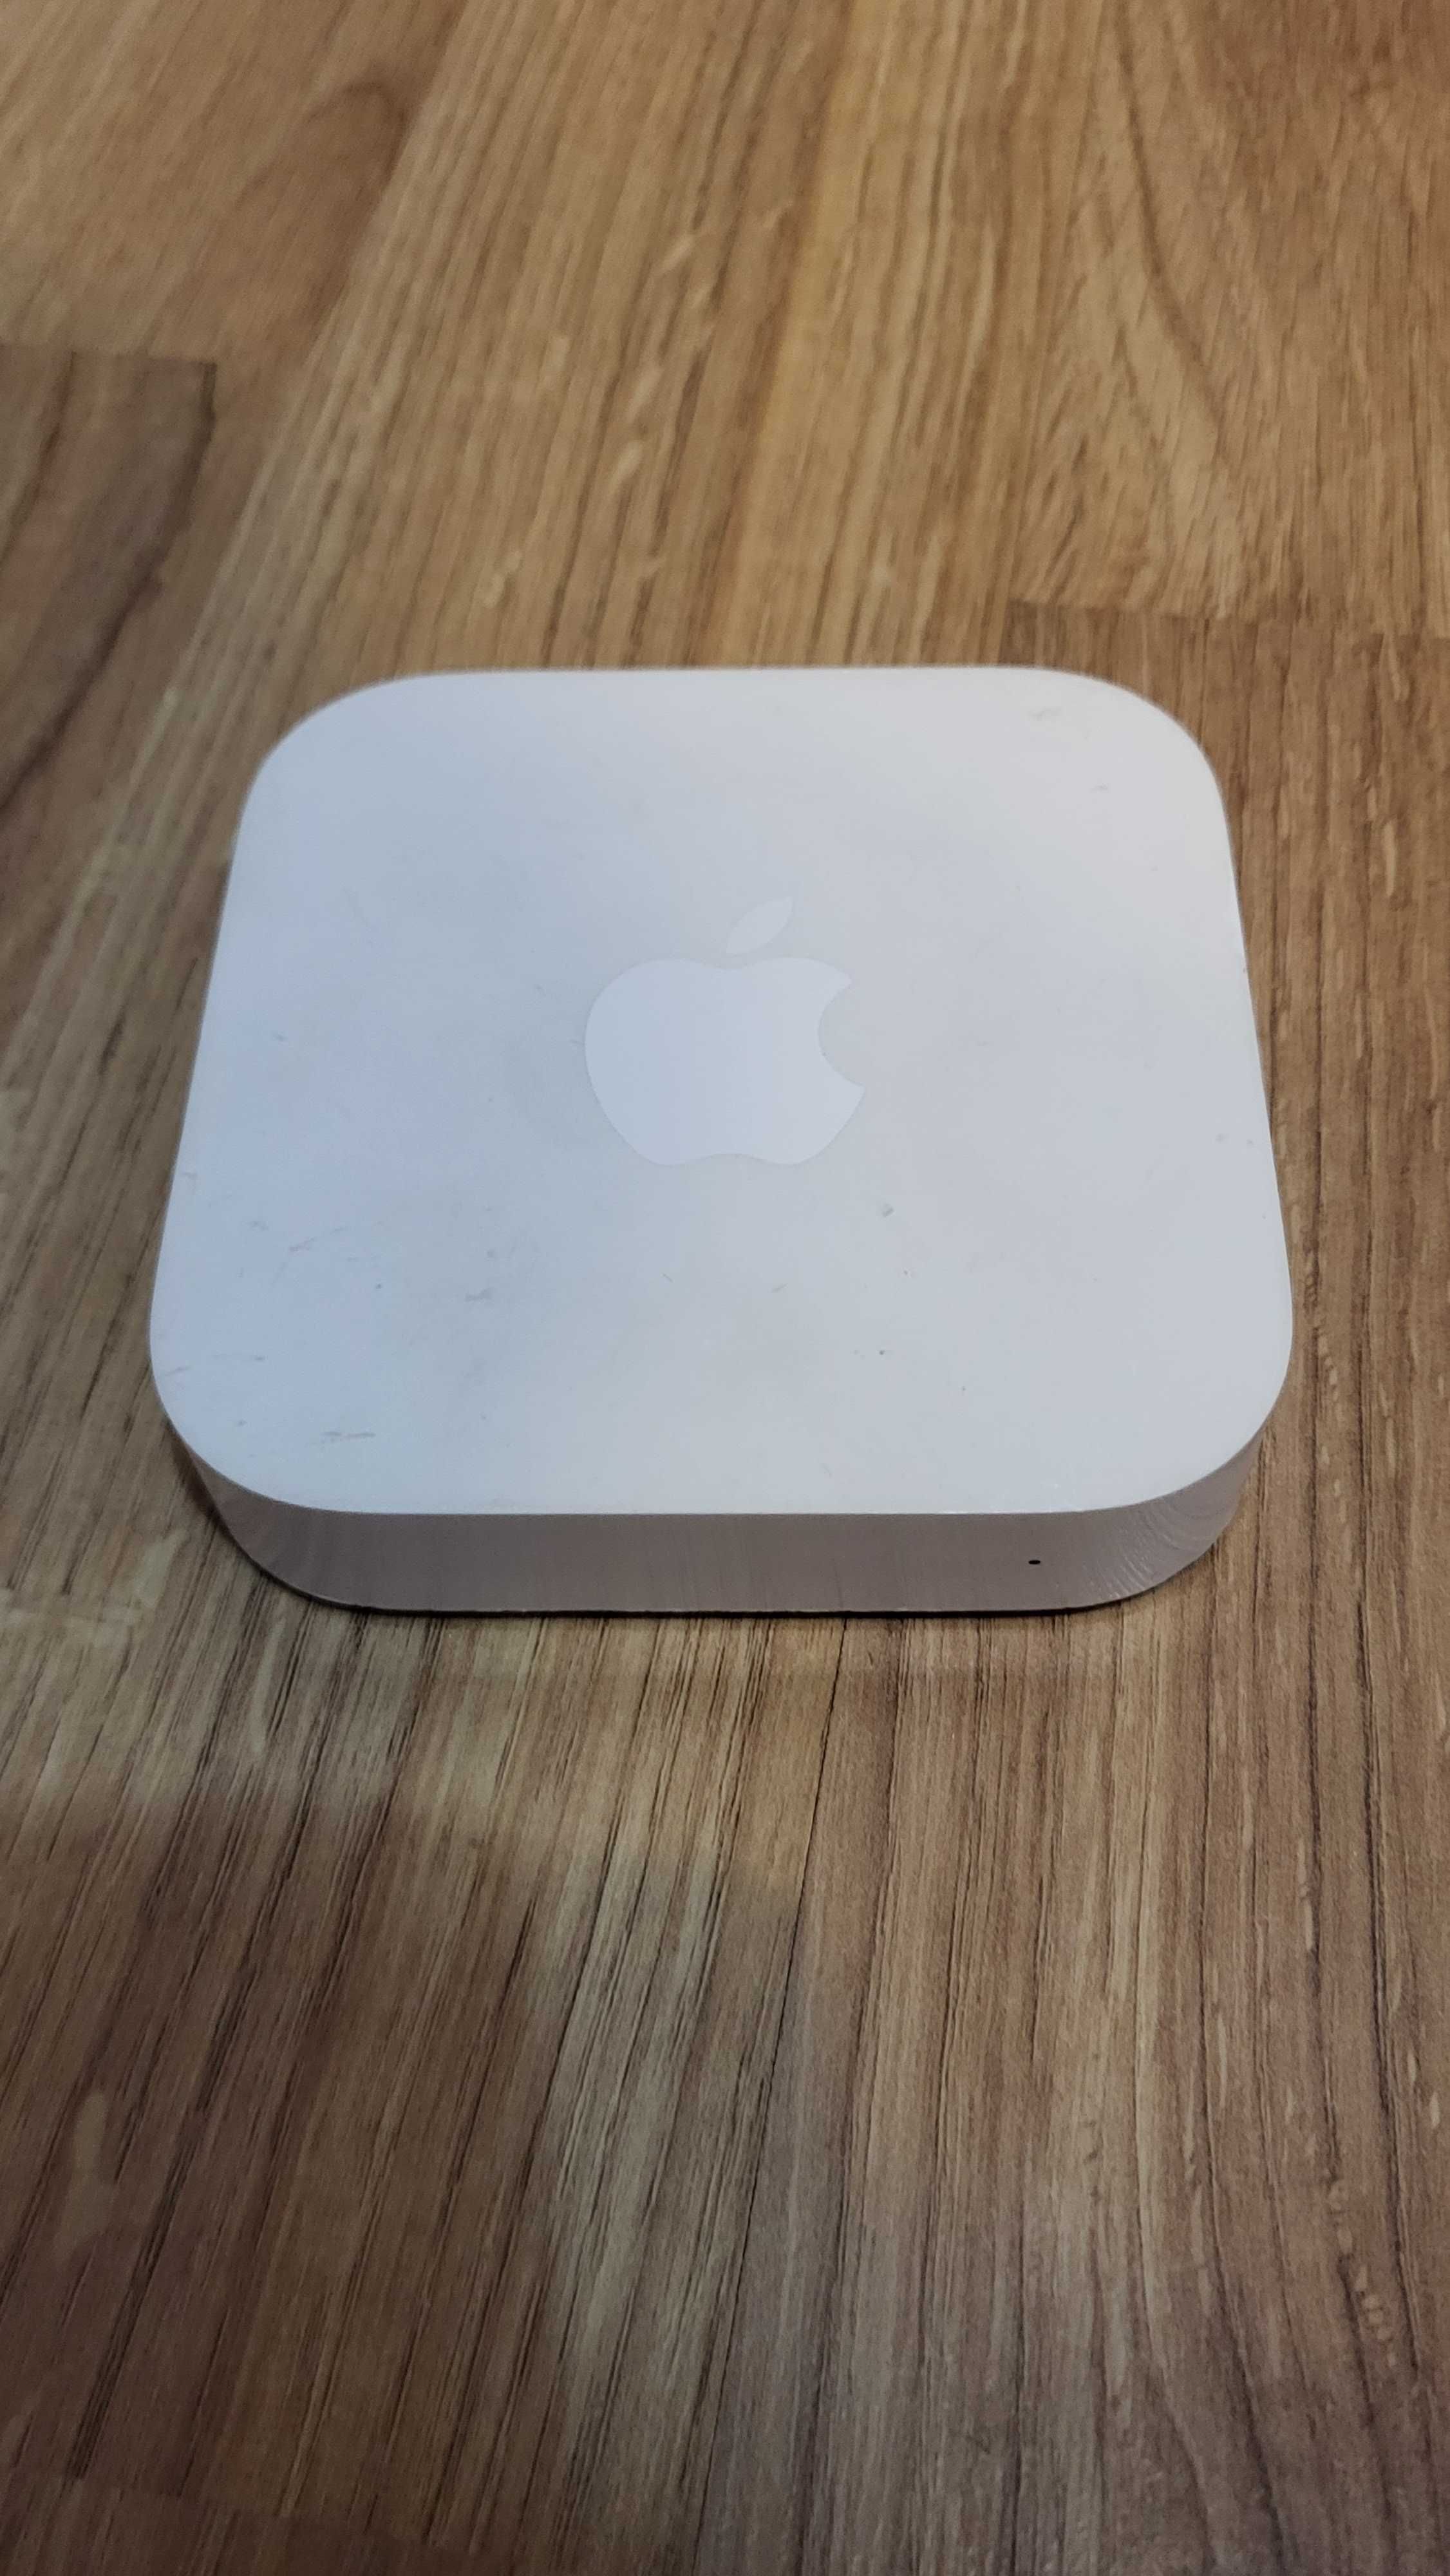 Router Wireless AirPort Express Base Station   Apple A1392 fuctional